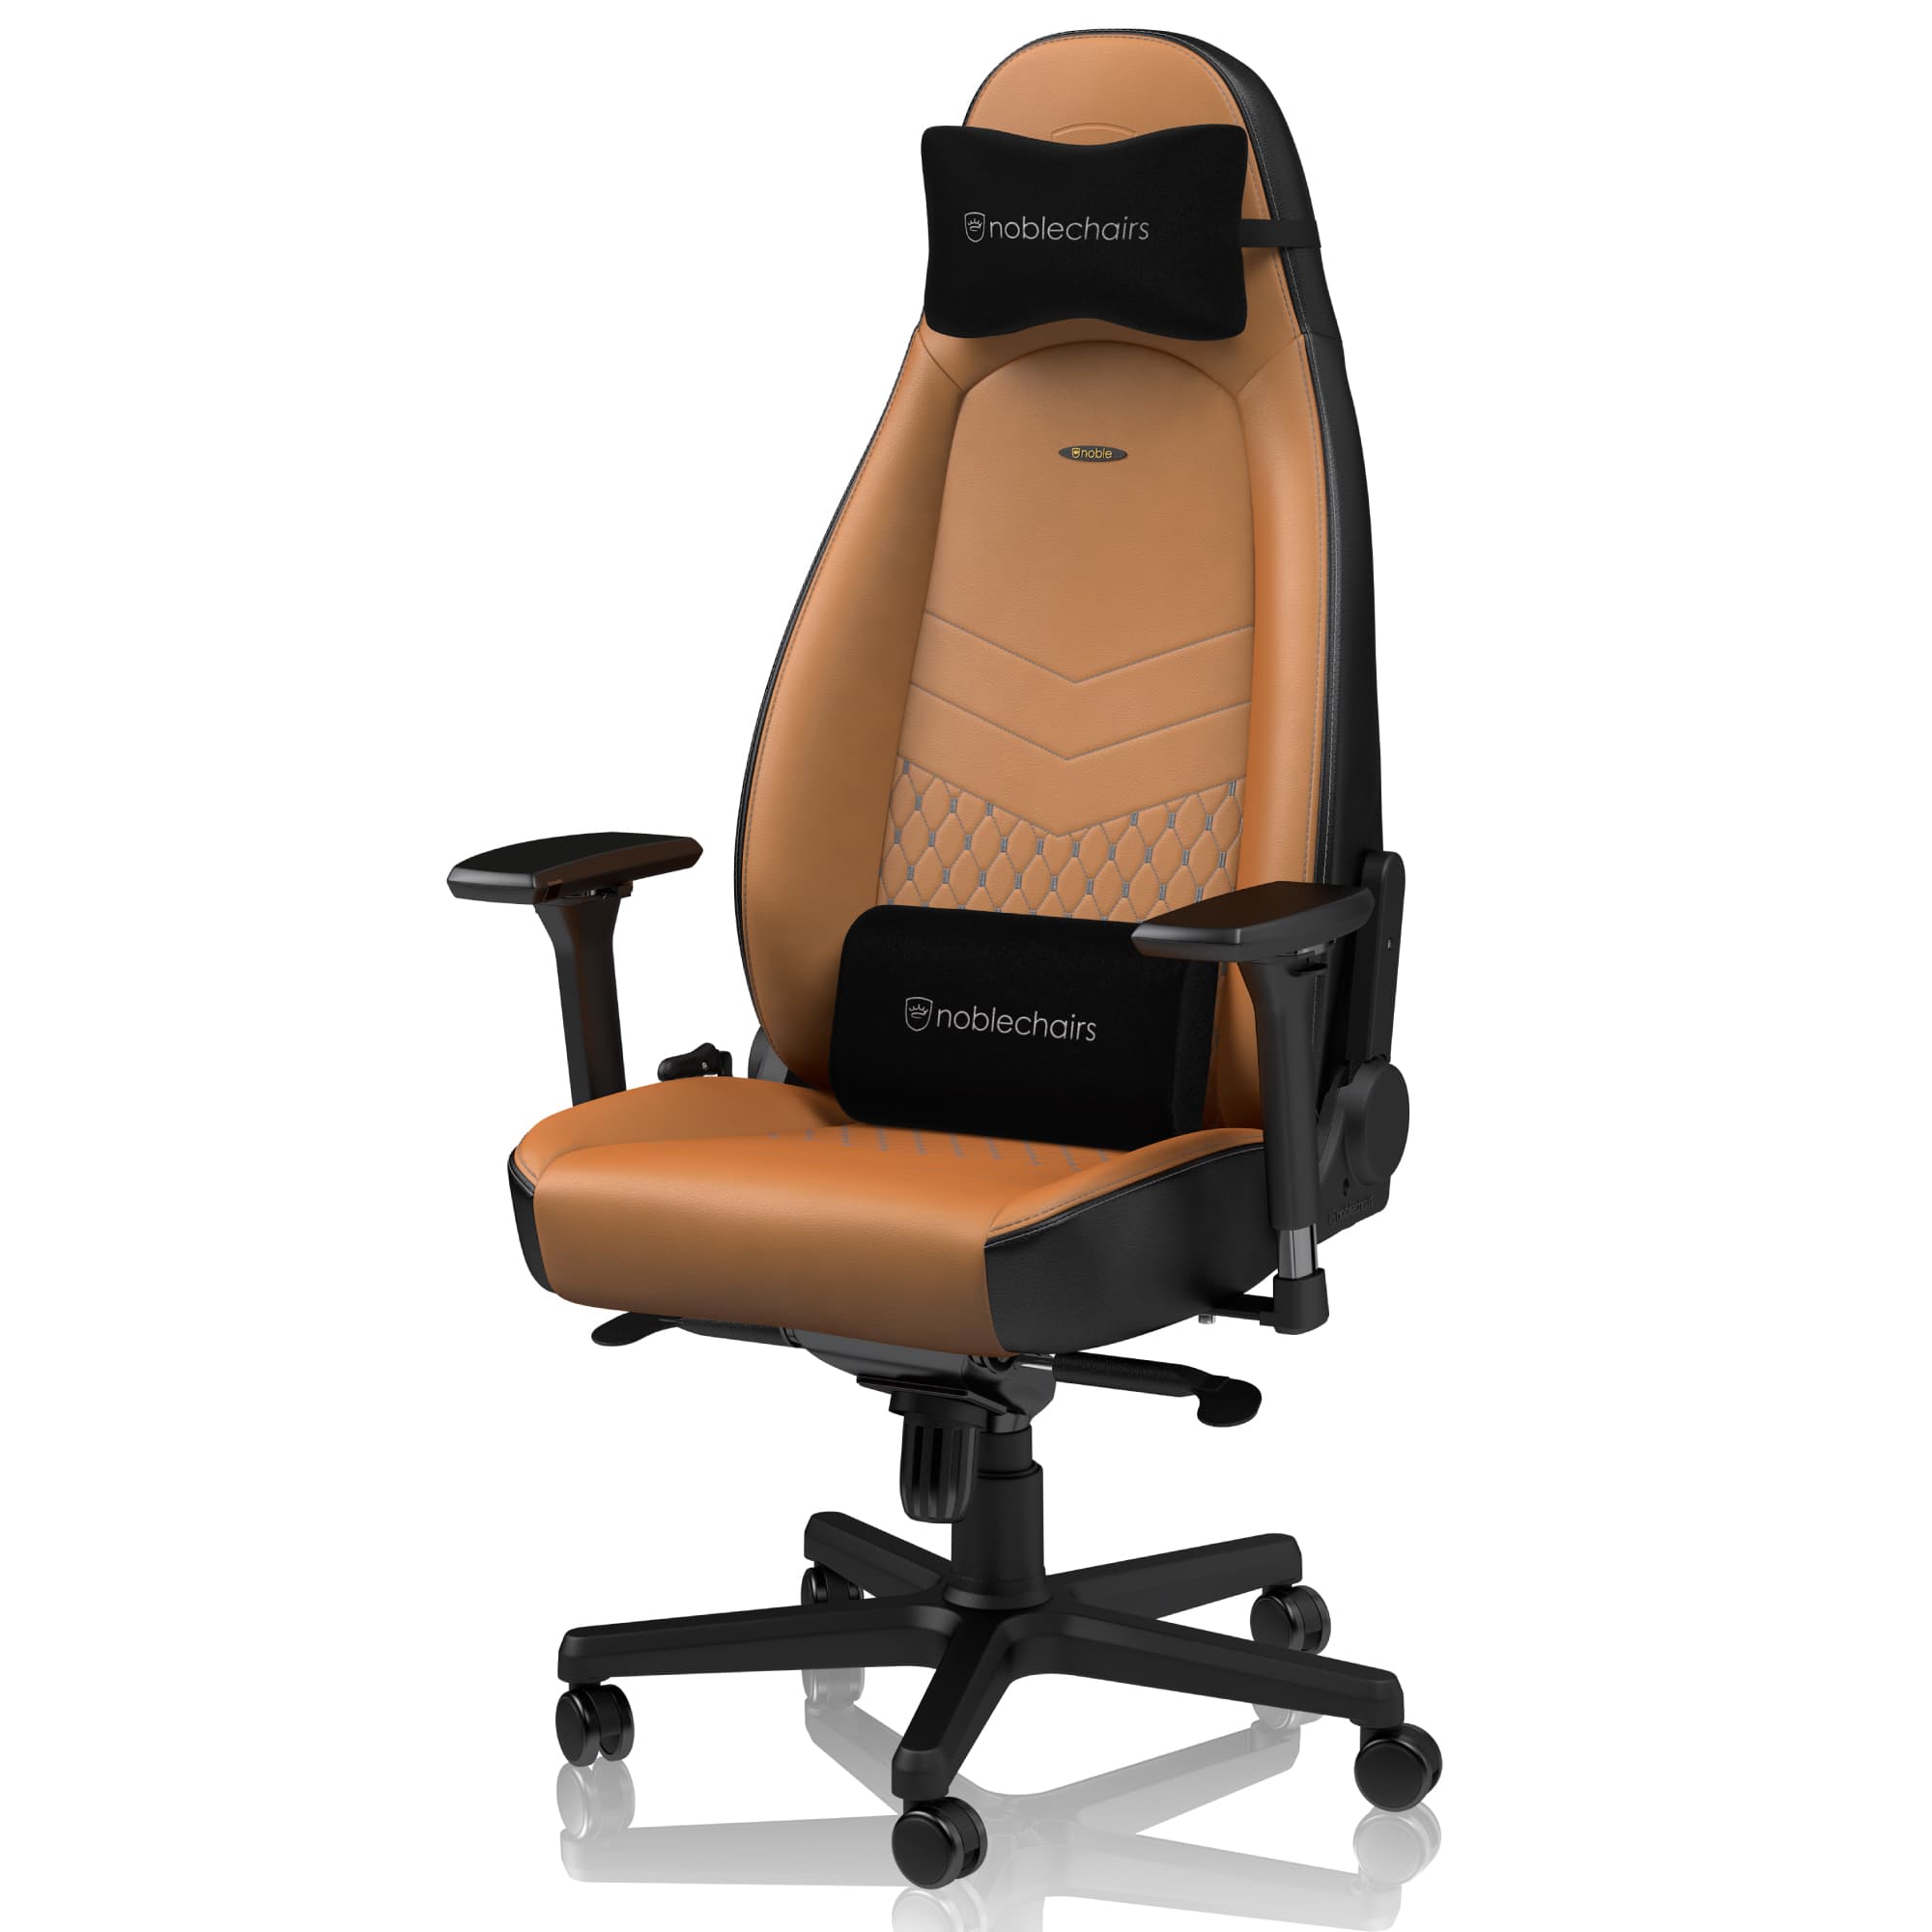 noblechairs ICON - Real Leather - ゲーミングチェア - 株式会社